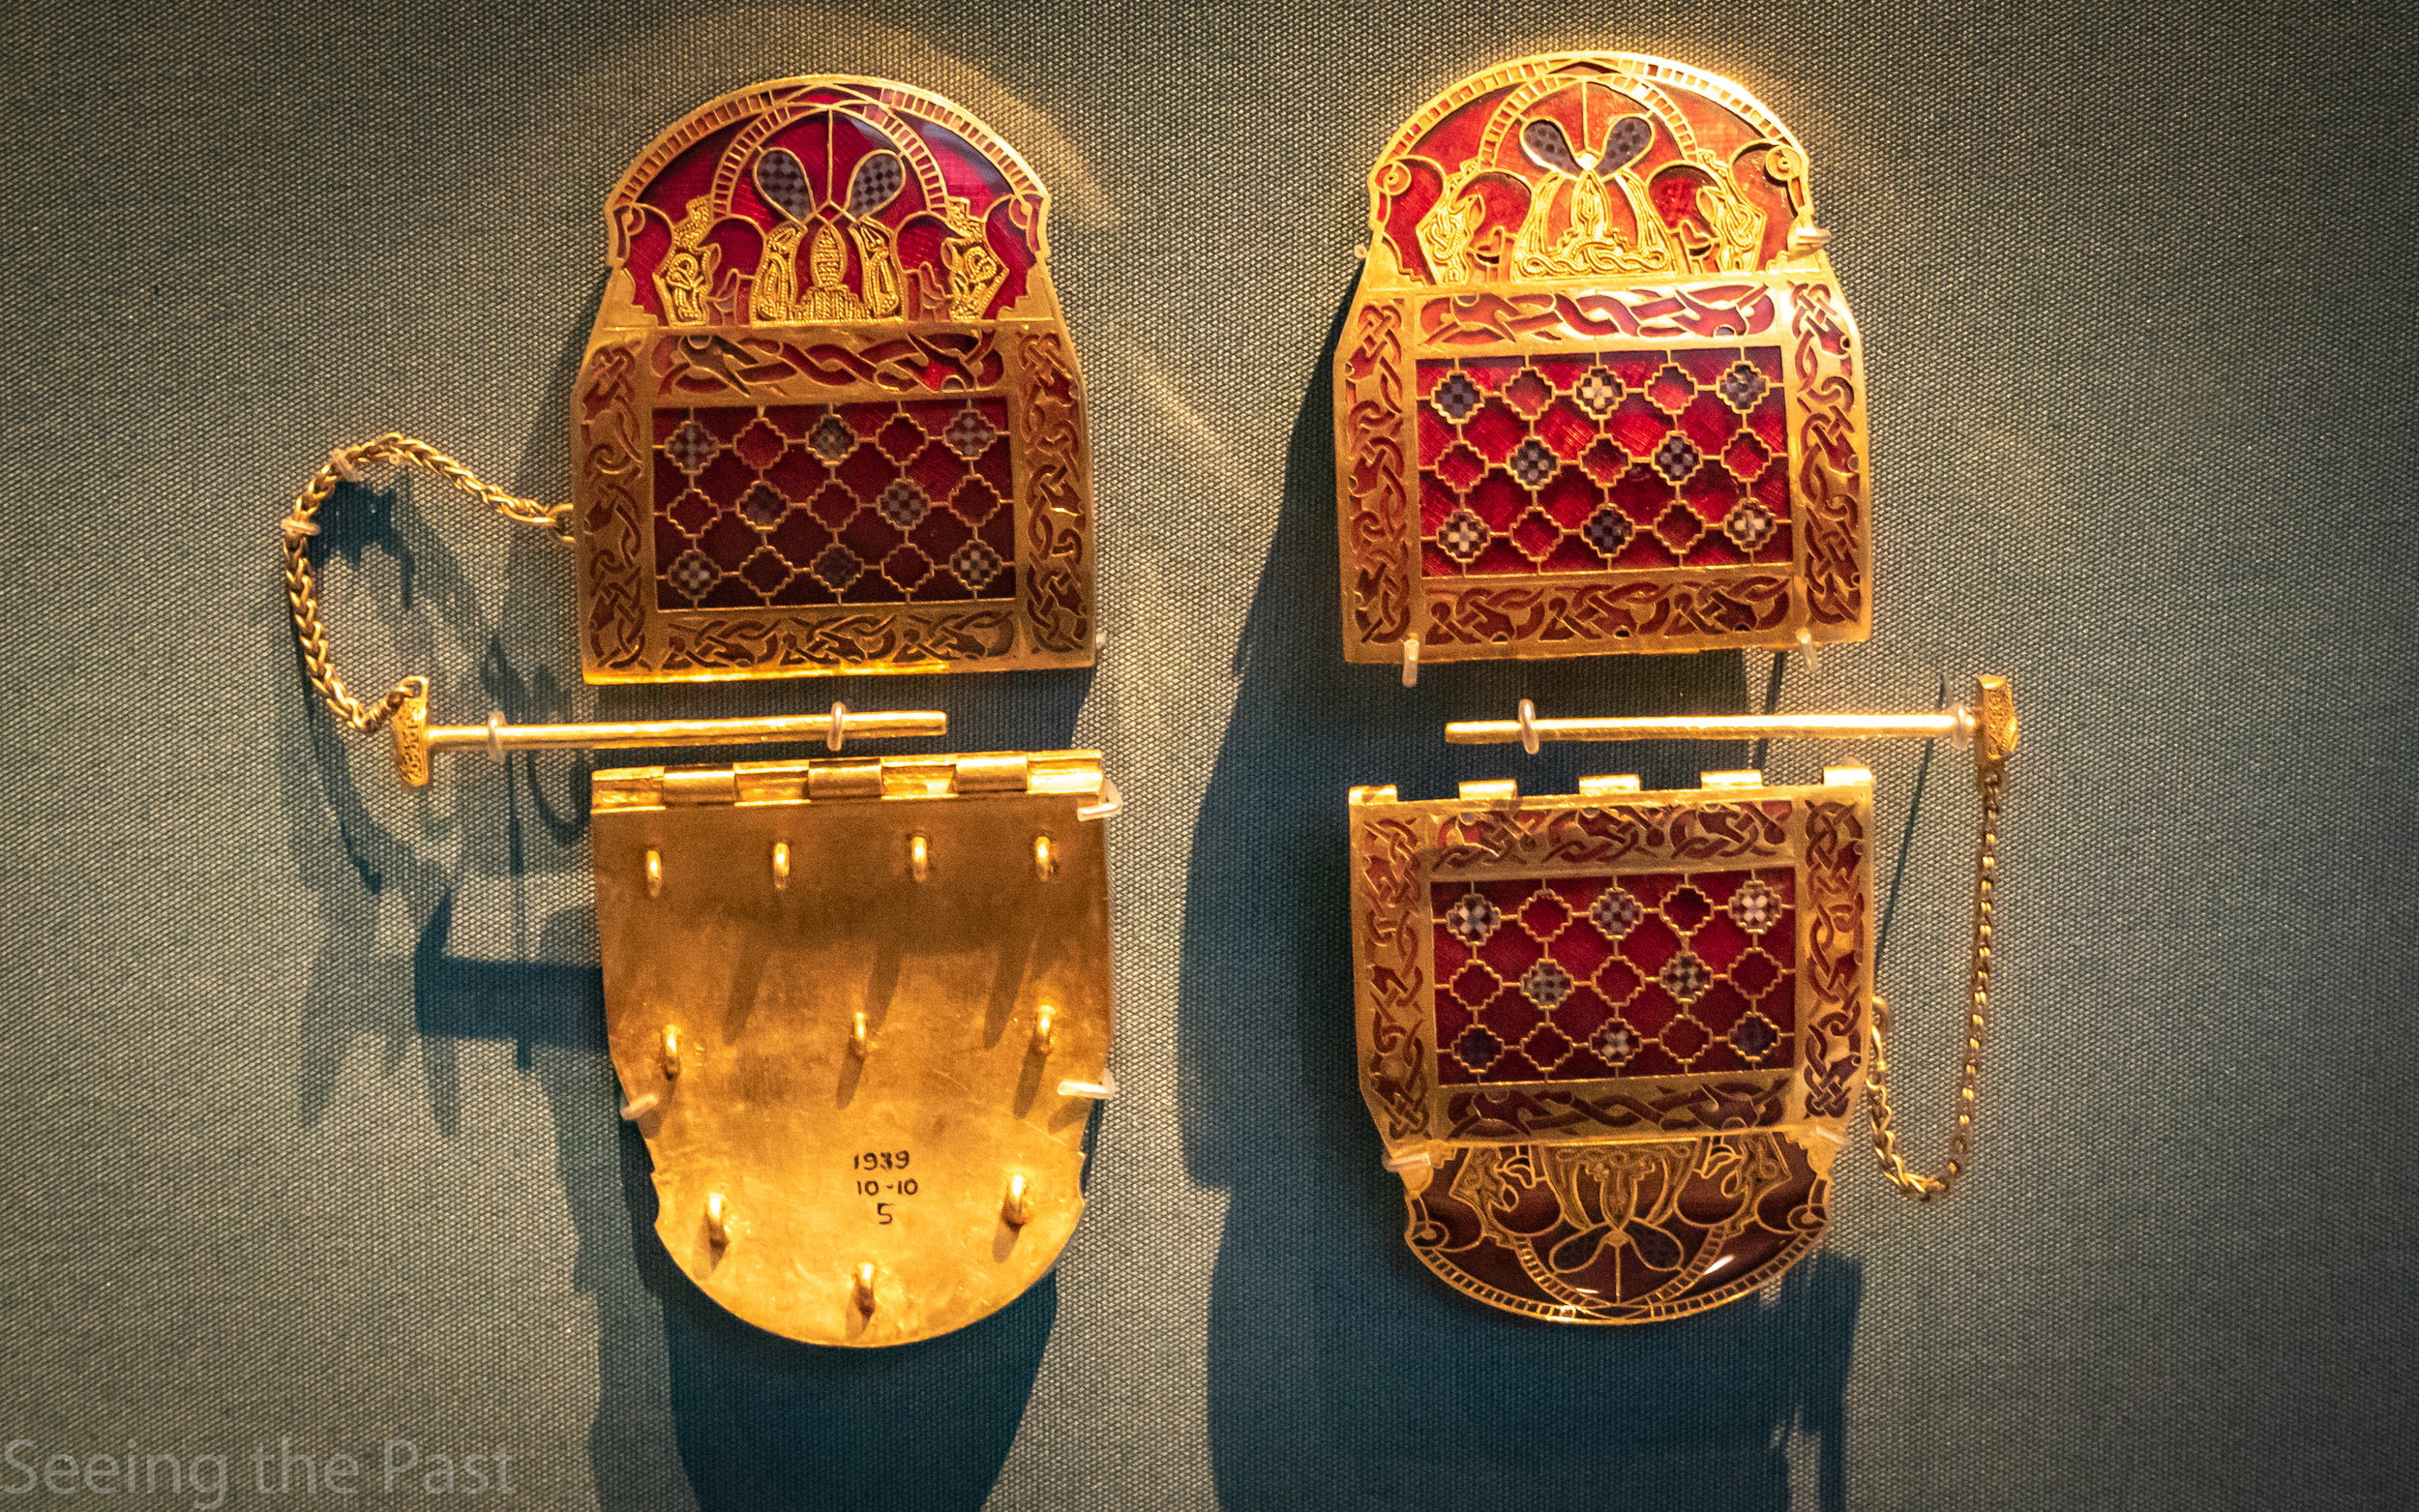 An exquisitely preserved helmet from the 7th century reveals the most extravagant gold ship burial yet documented in Northern Europe